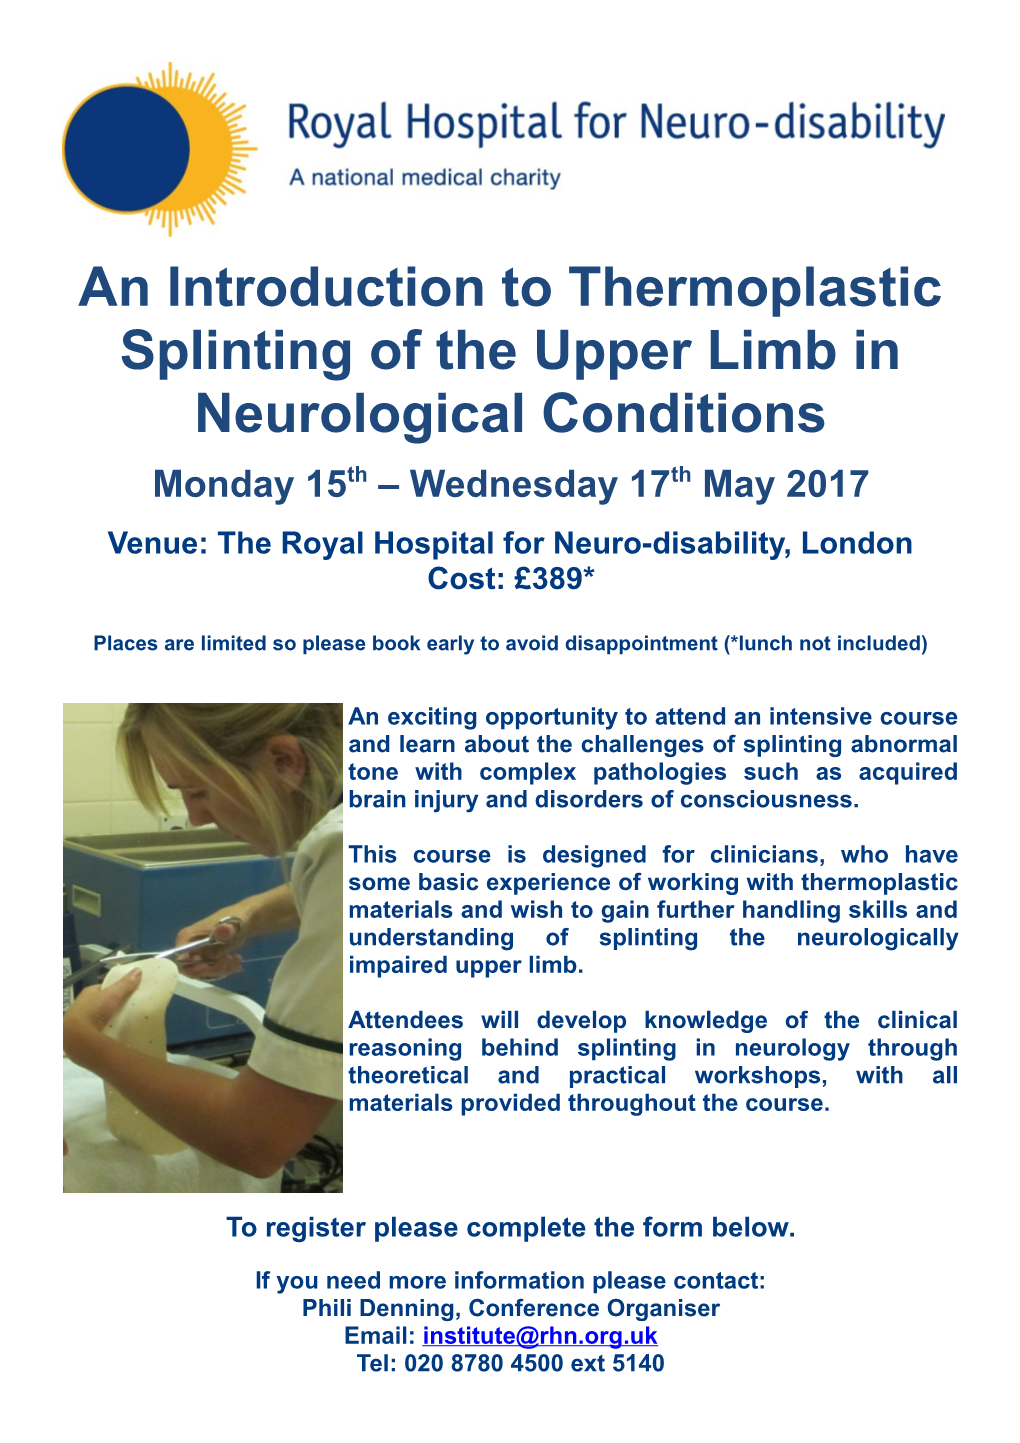 An Introduction to Thermoplastic Splinting of the Upper Limb in Neurological Conditions